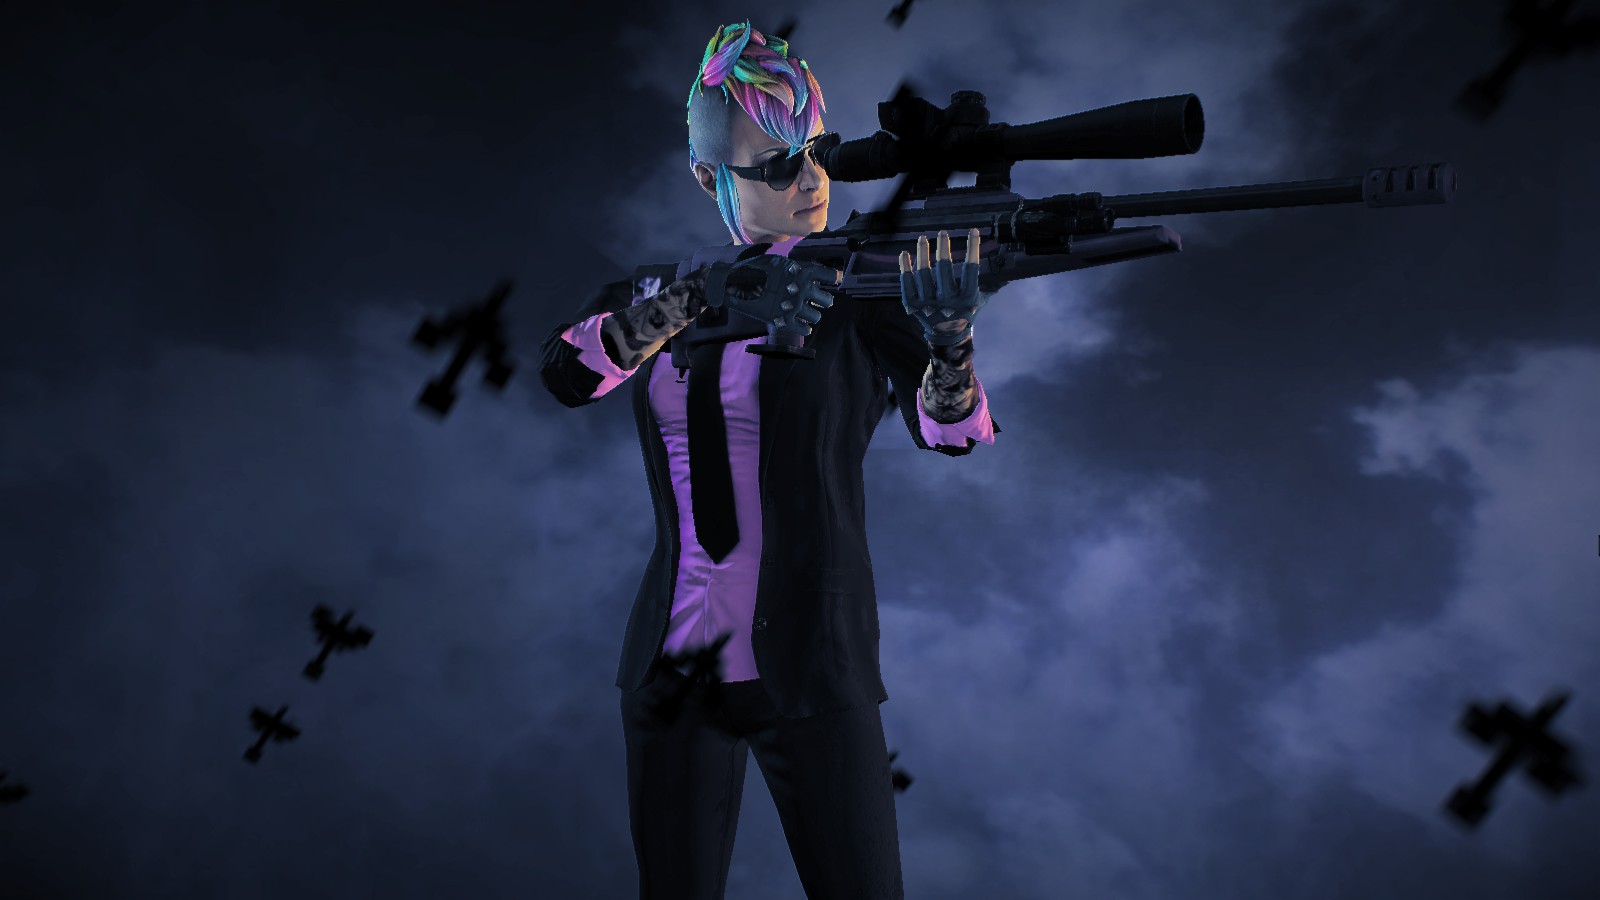 Sydney character payday 2 фото 51